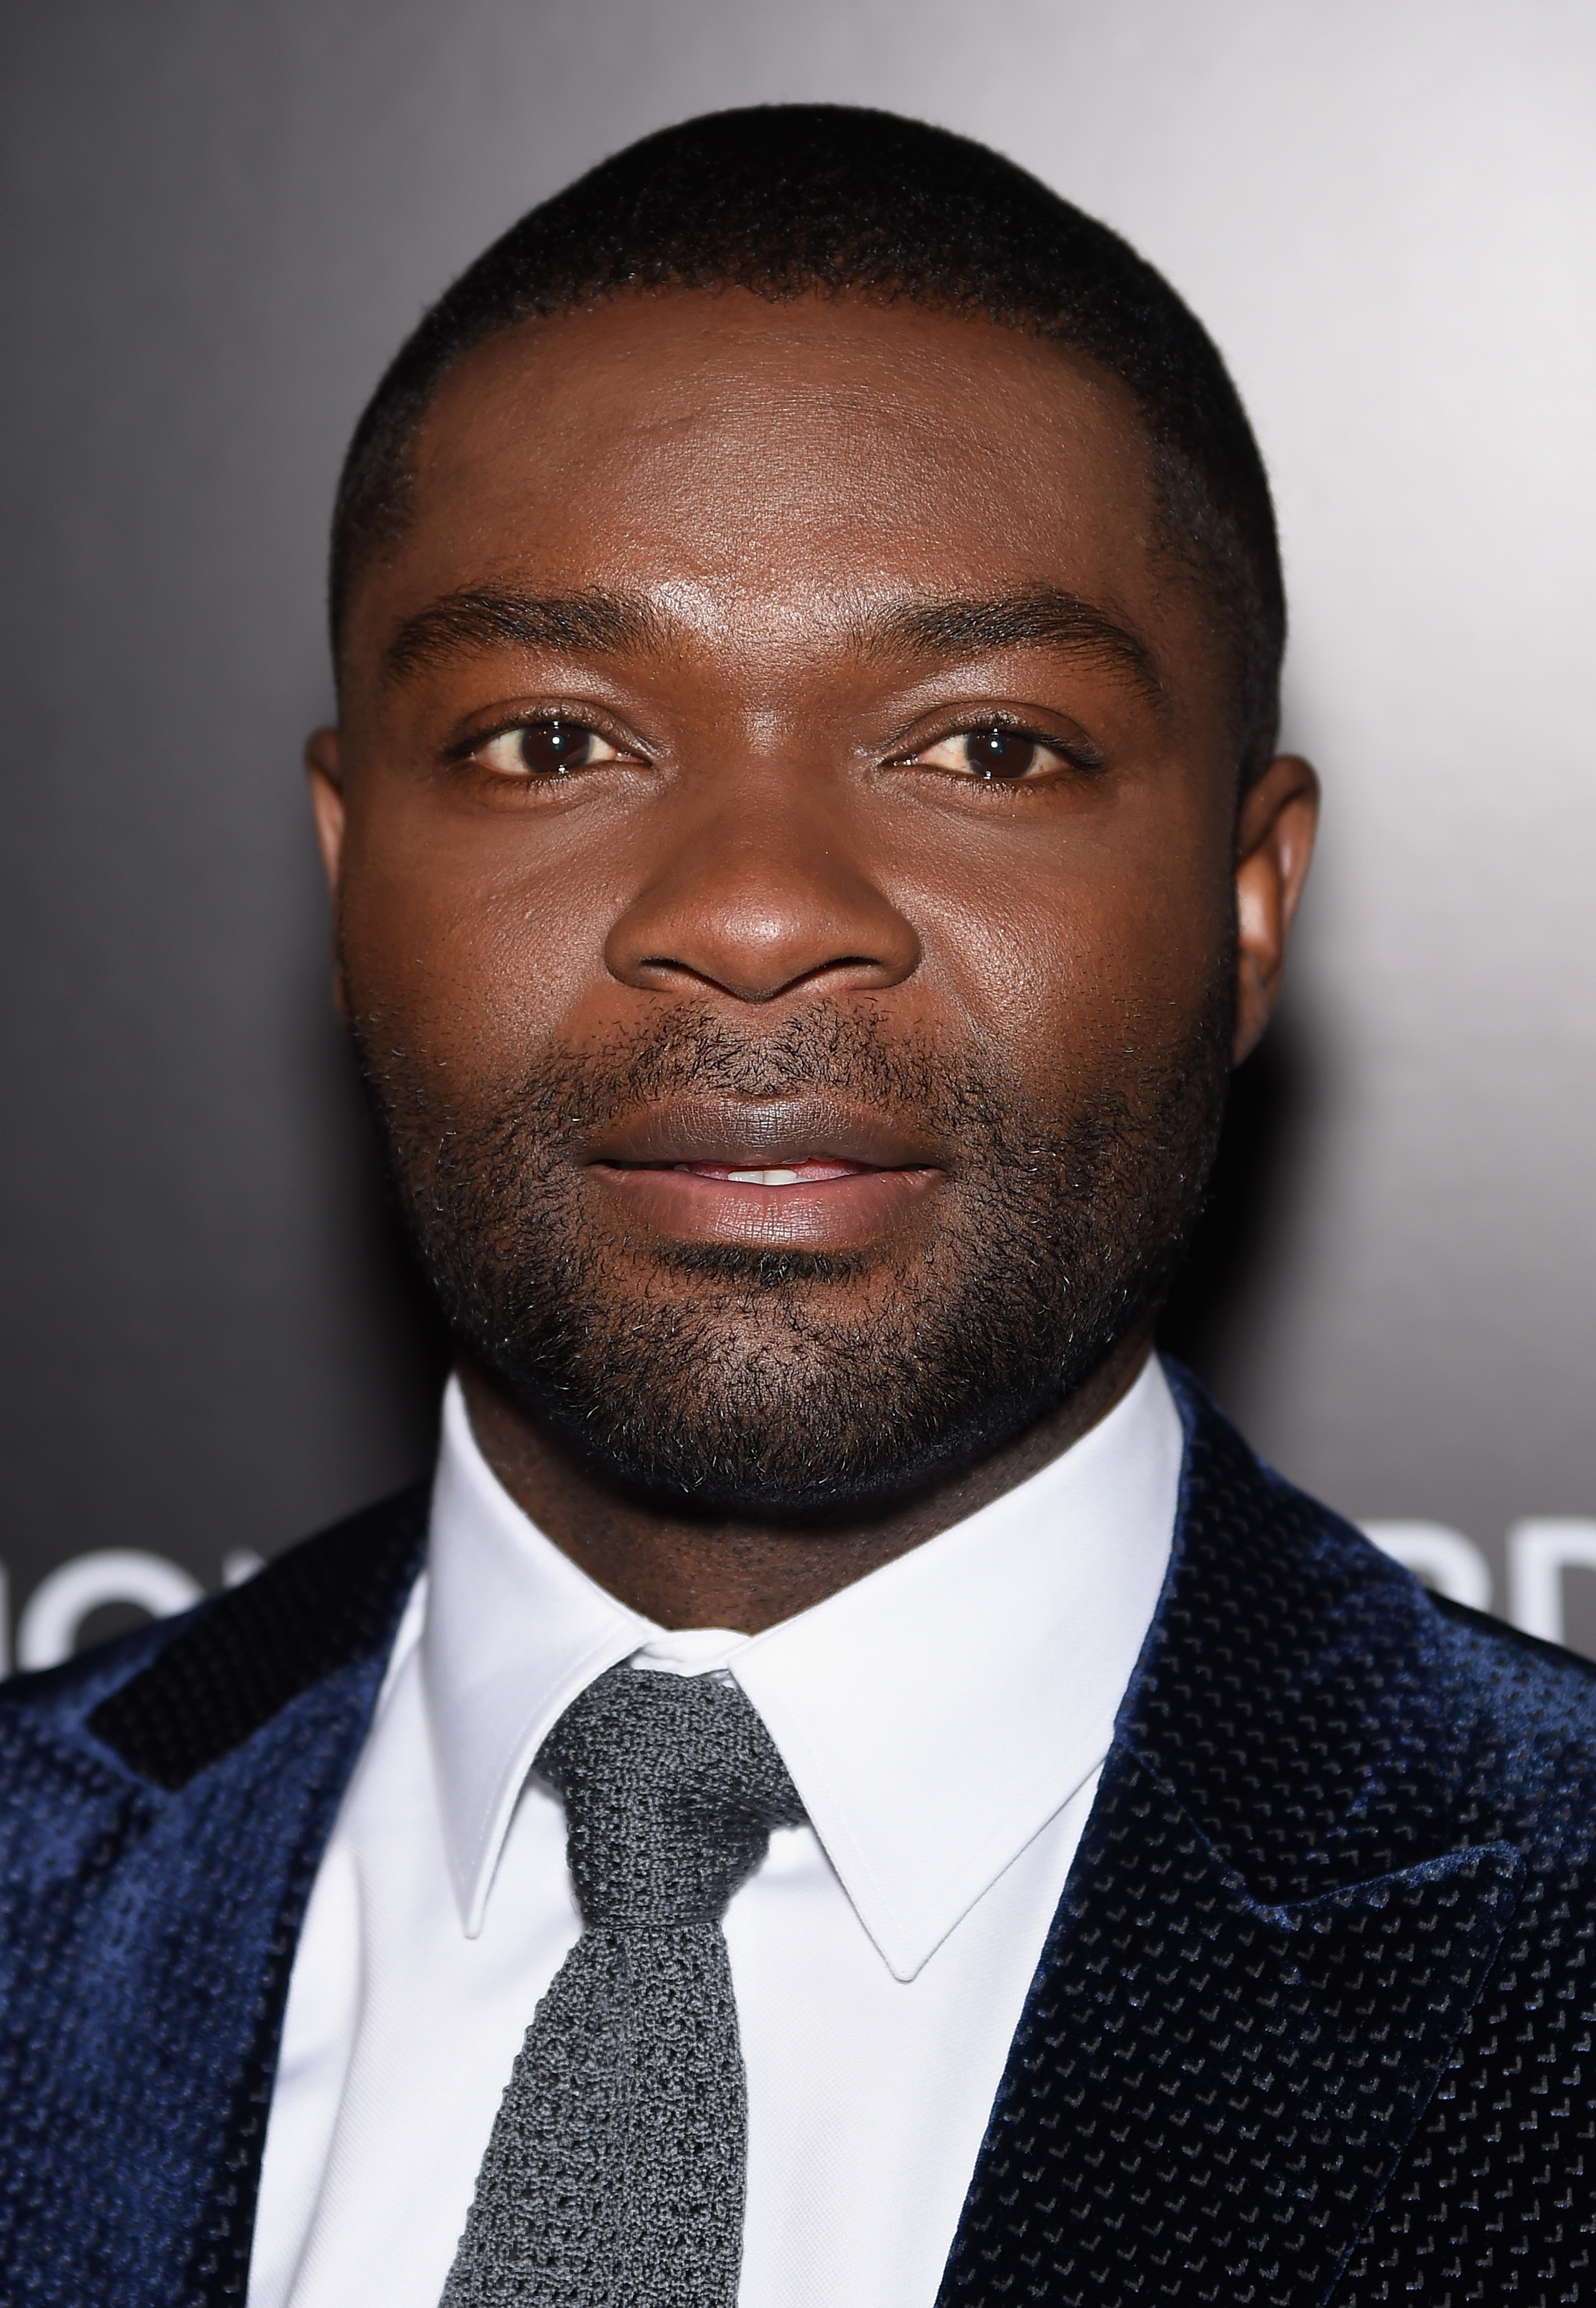 David Oyelowo attends the 2014 National Board of Review Gala on Jan. 6, 2015 in New York City. (Dimitrios Kambouris—2015 Getty Images)